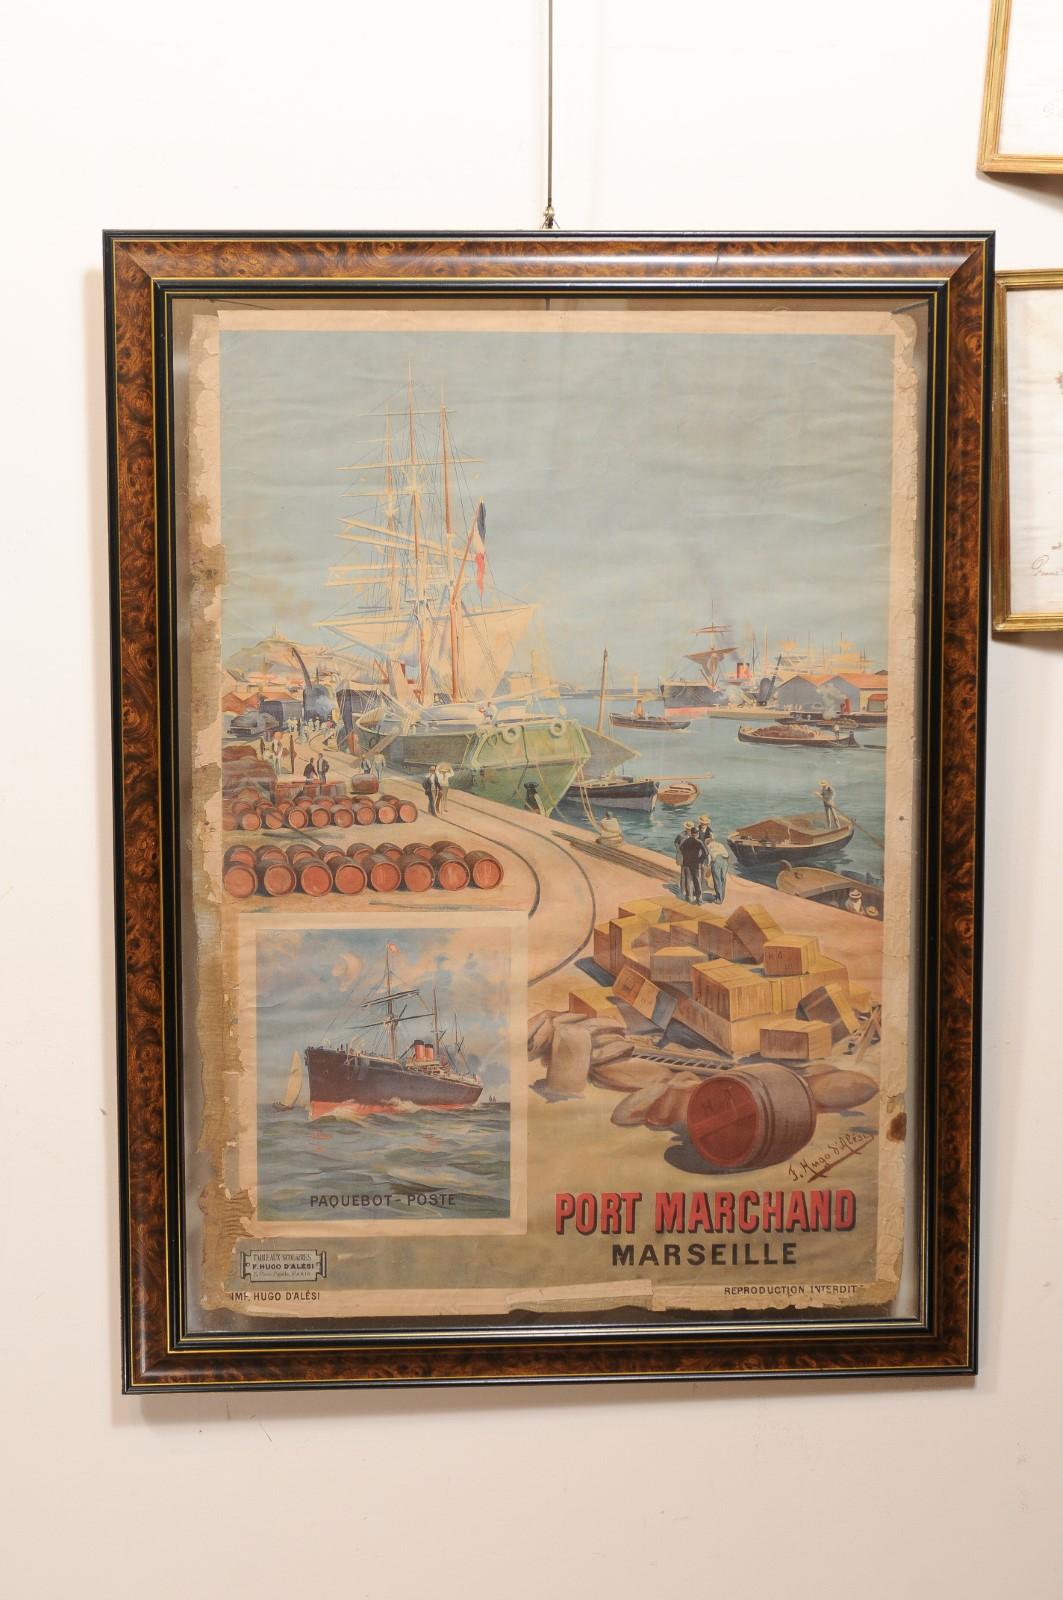 Linen Pair of Framed Original Early 20th Century French Travel Advertisements For Sale